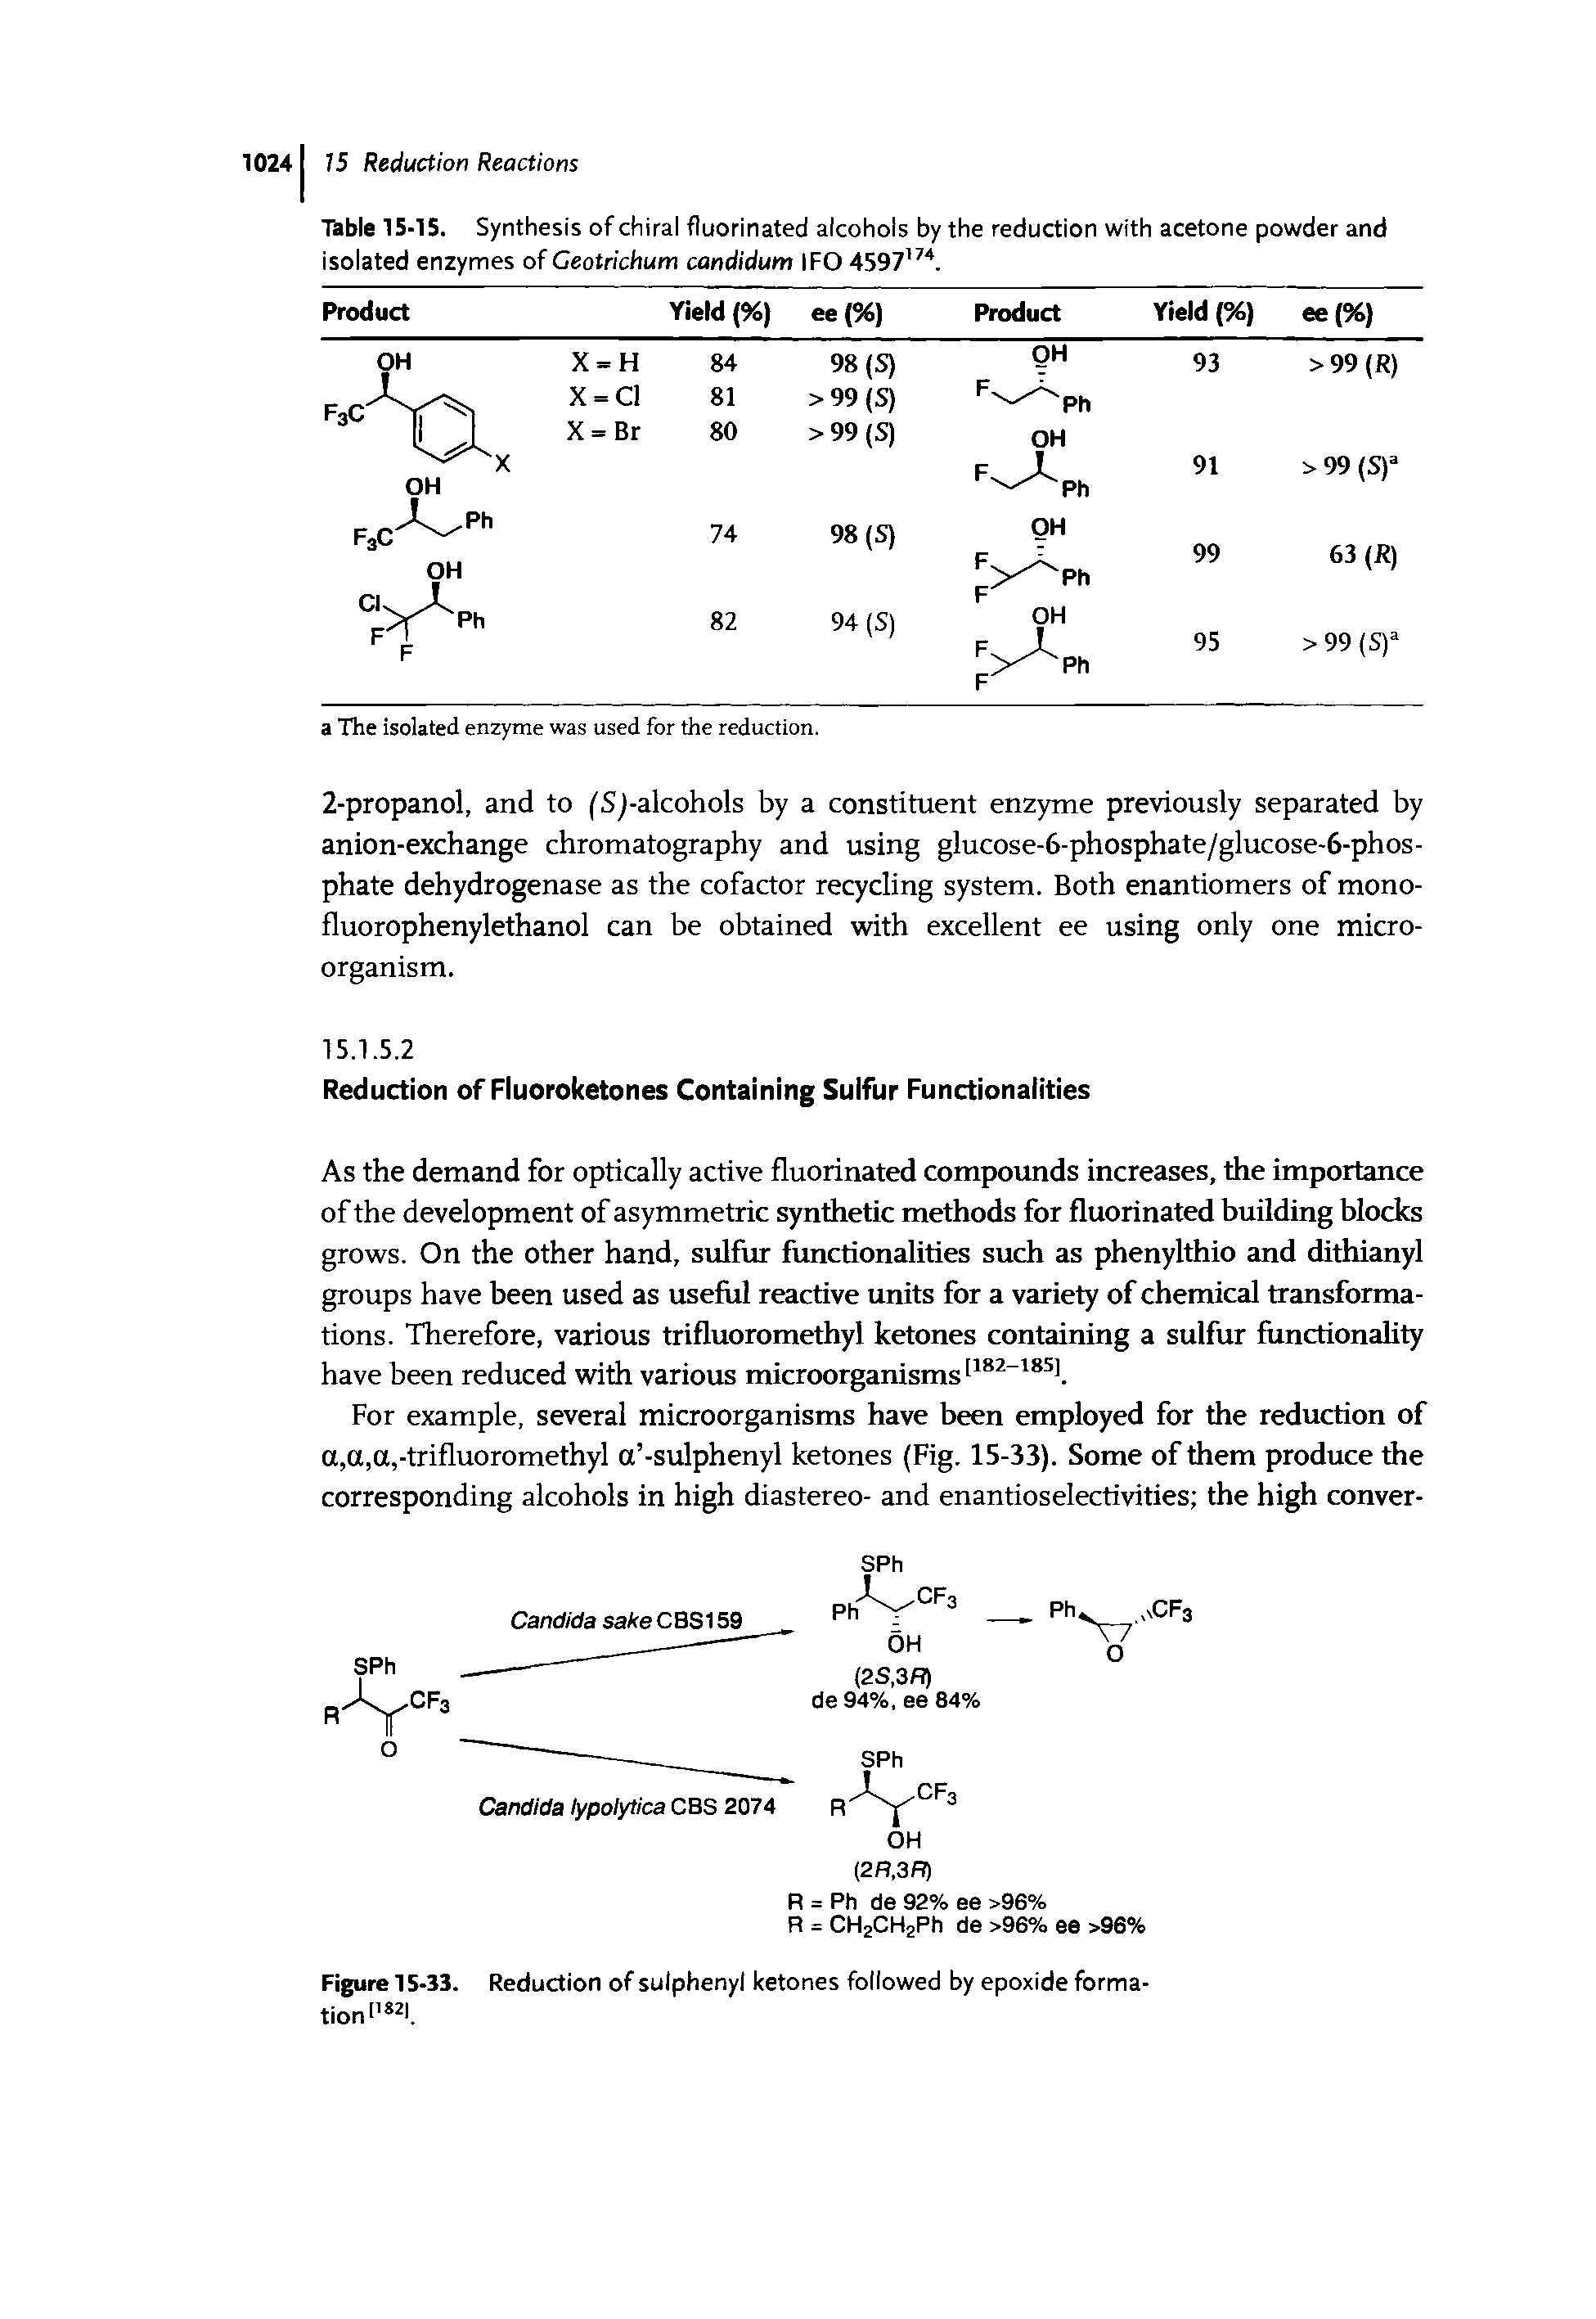 Table 15-15. Synthesis of chiral fluorinated alcohols by the reduction with acetone powder and isolated enzymes of Geotrichum candidum IFO 4597174.